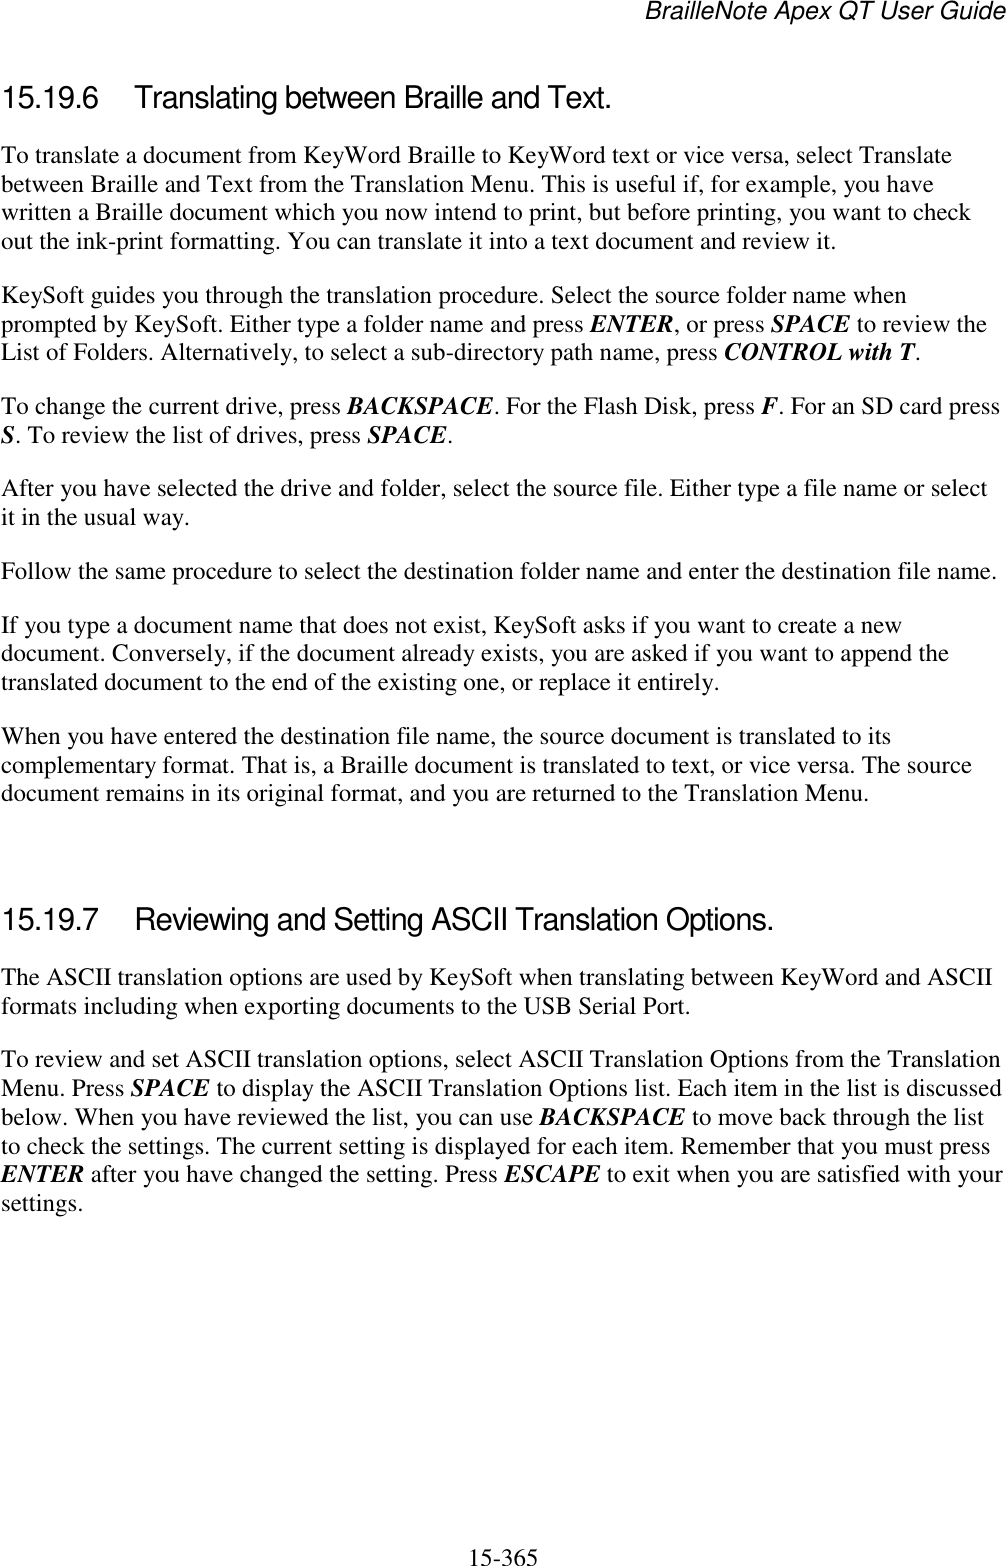 BrailleNote Apex QT User Guide  15-365   15.19.6  Translating between Braille and Text. To translate a document from KeyWord Braille to KeyWord text or vice versa, select Translate between Braille and Text from the Translation Menu. This is useful if, for example, you have written a Braille document which you now intend to print, but before printing, you want to check out the ink-print formatting. You can translate it into a text document and review it. KeySoft guides you through the translation procedure. Select the source folder name when prompted by KeySoft. Either type a folder name and press ENTER, or press SPACE to review the List of Folders. Alternatively, to select a sub-directory path name, press CONTROL with T. To change the current drive, press BACKSPACE. For the Flash Disk, press F. For an SD card press S. To review the list of drives, press SPACE. After you have selected the drive and folder, select the source file. Either type a file name or select it in the usual way. Follow the same procedure to select the destination folder name and enter the destination file name. If you type a document name that does not exist, KeySoft asks if you want to create a new document. Conversely, if the document already exists, you are asked if you want to append the translated document to the end of the existing one, or replace it entirely. When you have entered the destination file name, the source document is translated to its complementary format. That is, a Braille document is translated to text, or vice versa. The source document remains in its original format, and you are returned to the Translation Menu.   15.19.7  Reviewing and Setting ASCII Translation Options. The ASCII translation options are used by KeySoft when translating between KeyWord and ASCII formats including when exporting documents to the USB Serial Port. To review and set ASCII translation options, select ASCII Translation Options from the Translation Menu. Press SPACE to display the ASCII Translation Options list. Each item in the list is discussed below. When you have reviewed the list, you can use BACKSPACE to move back through the list to check the settings. The current setting is displayed for each item. Remember that you must press ENTER after you have changed the setting. Press ESCAPE to exit when you are satisfied with your settings.  